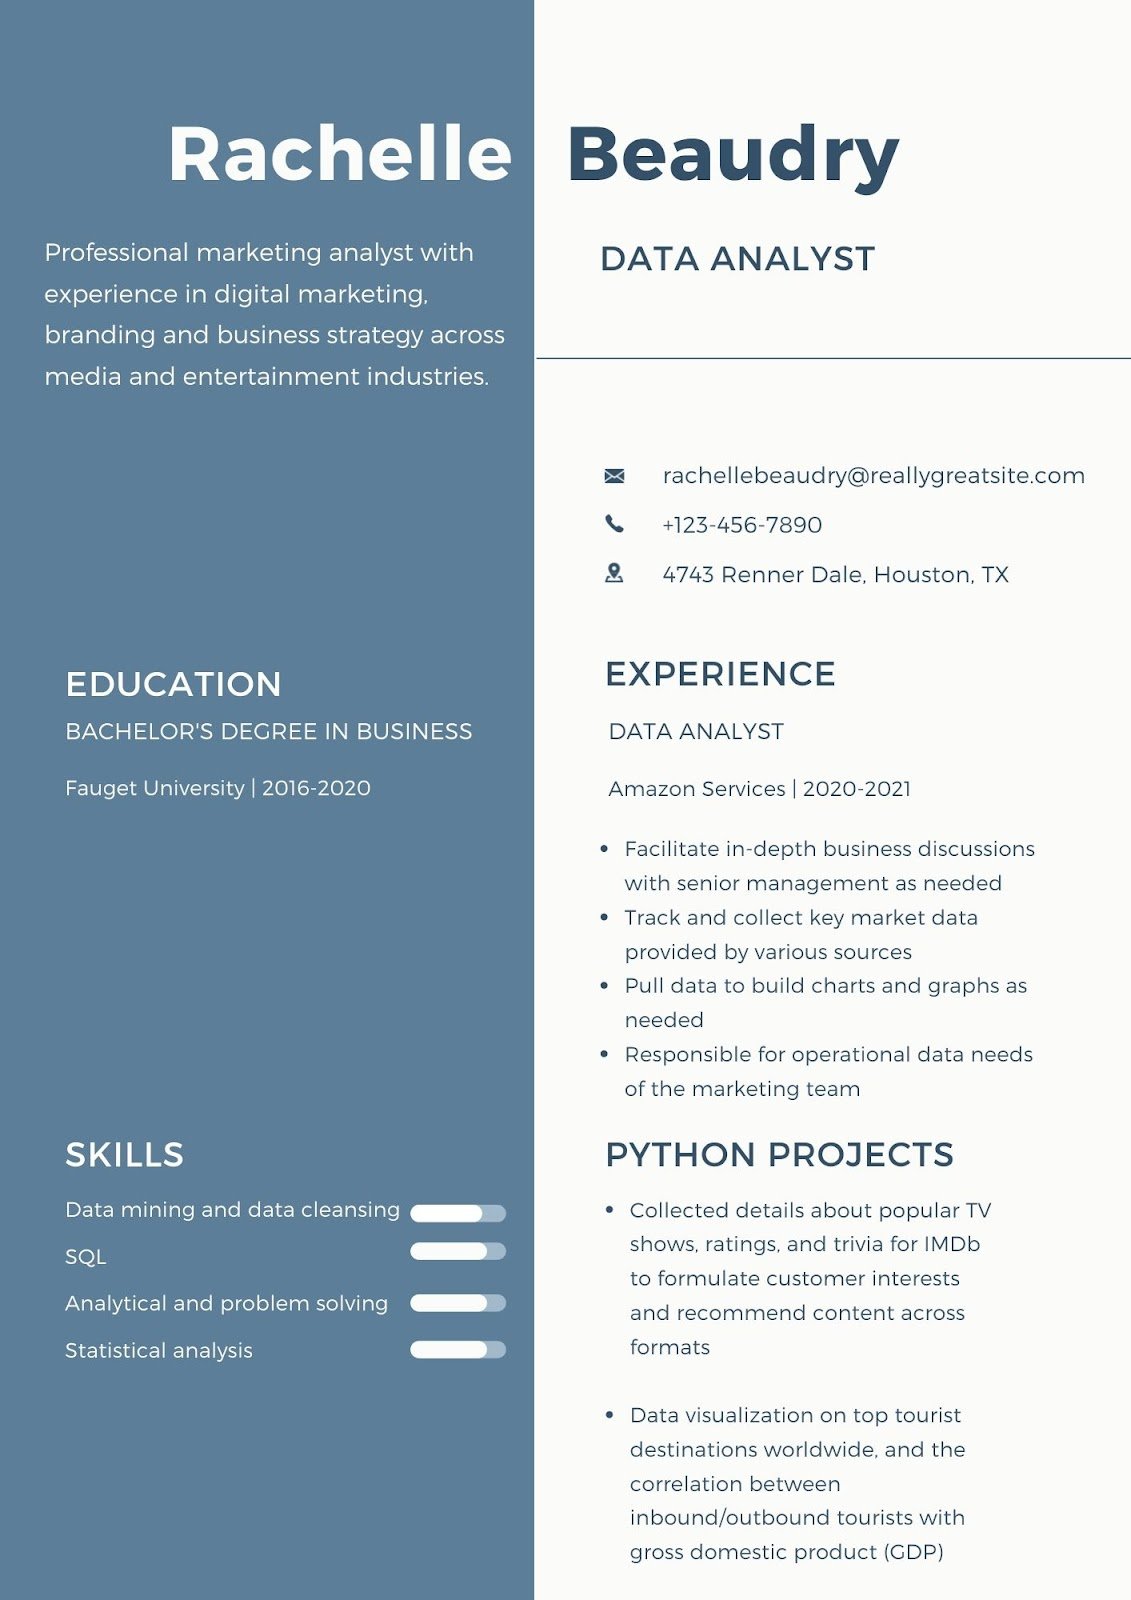 data science projects to put on resume